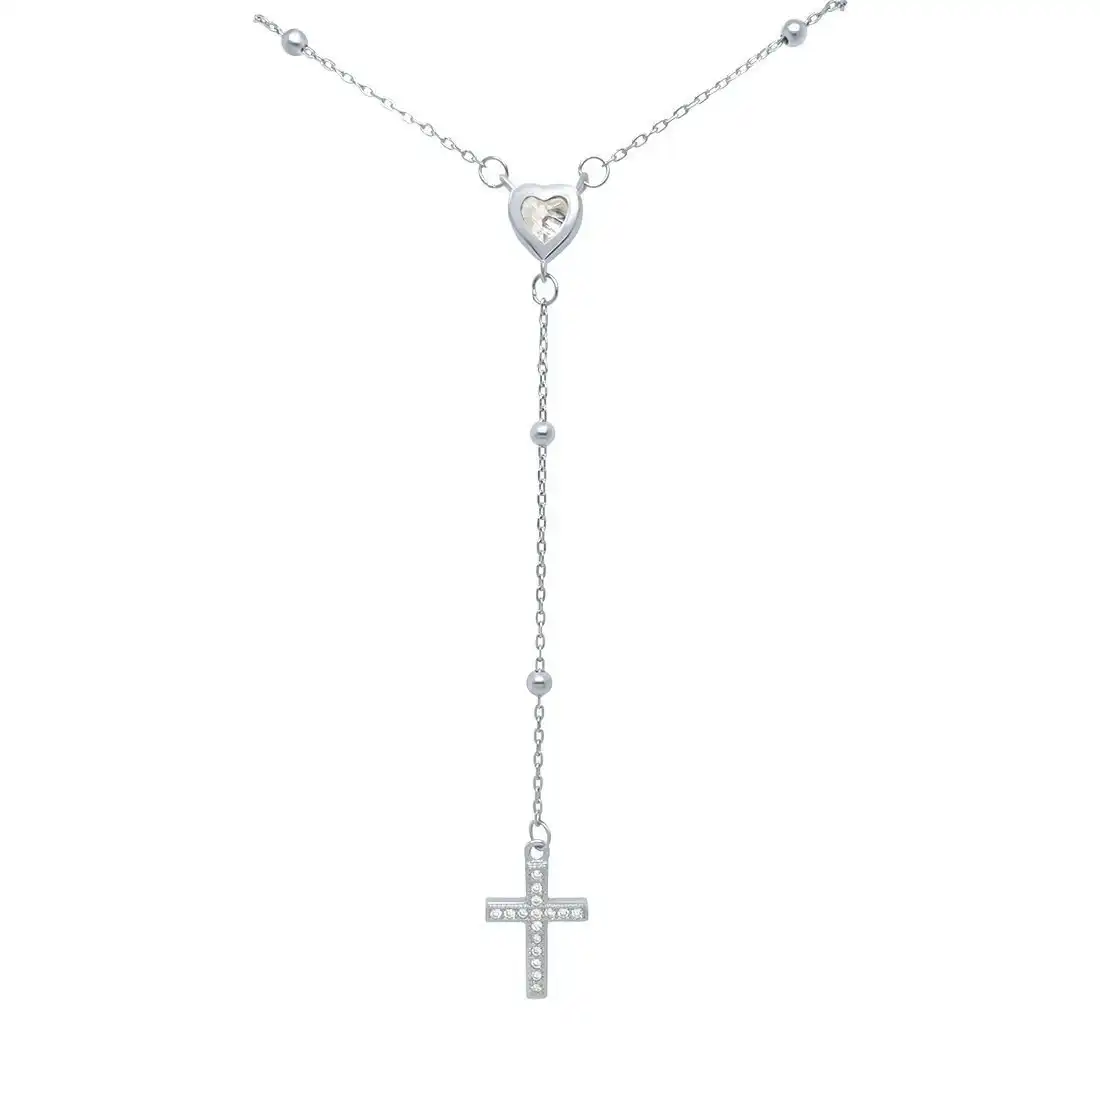 45cm Cross and Heart Rosary Necklace with Cubic Zirconia in Sterling Silver